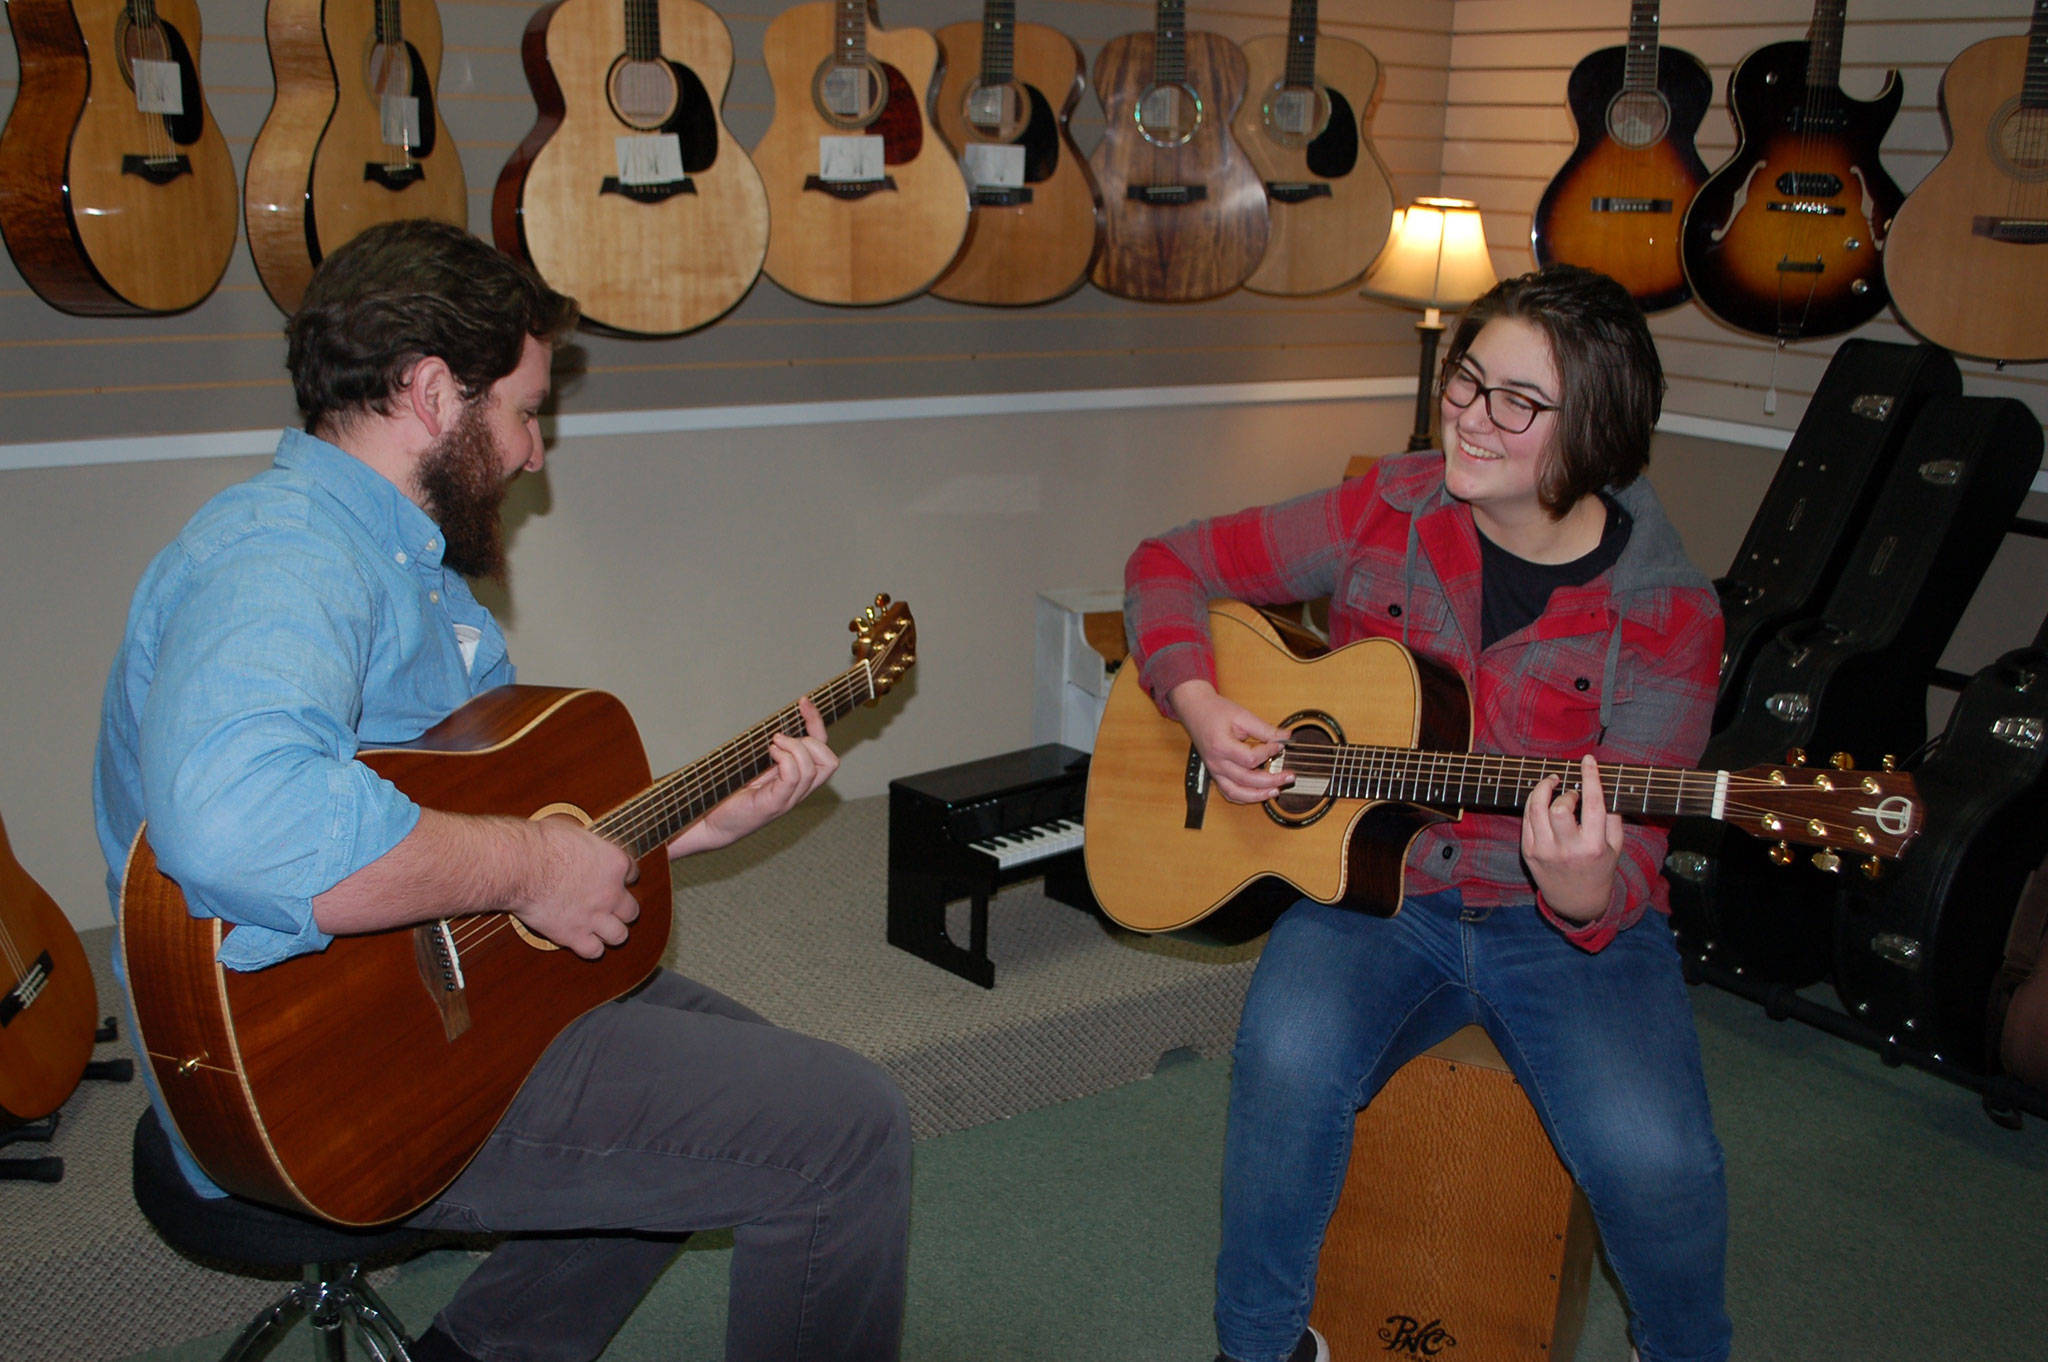 Sequim High School sophomore Kyah Fukunaga (right) tries out her new acoustic-electric guitar she received during the school’s Winter Wishes assembly on Dec. 13. She practices with Joyful Noise Music Center instructor John Mangiameli (left) at the center during a music lesson. Sequm Gazette photo by Erin Hawkins